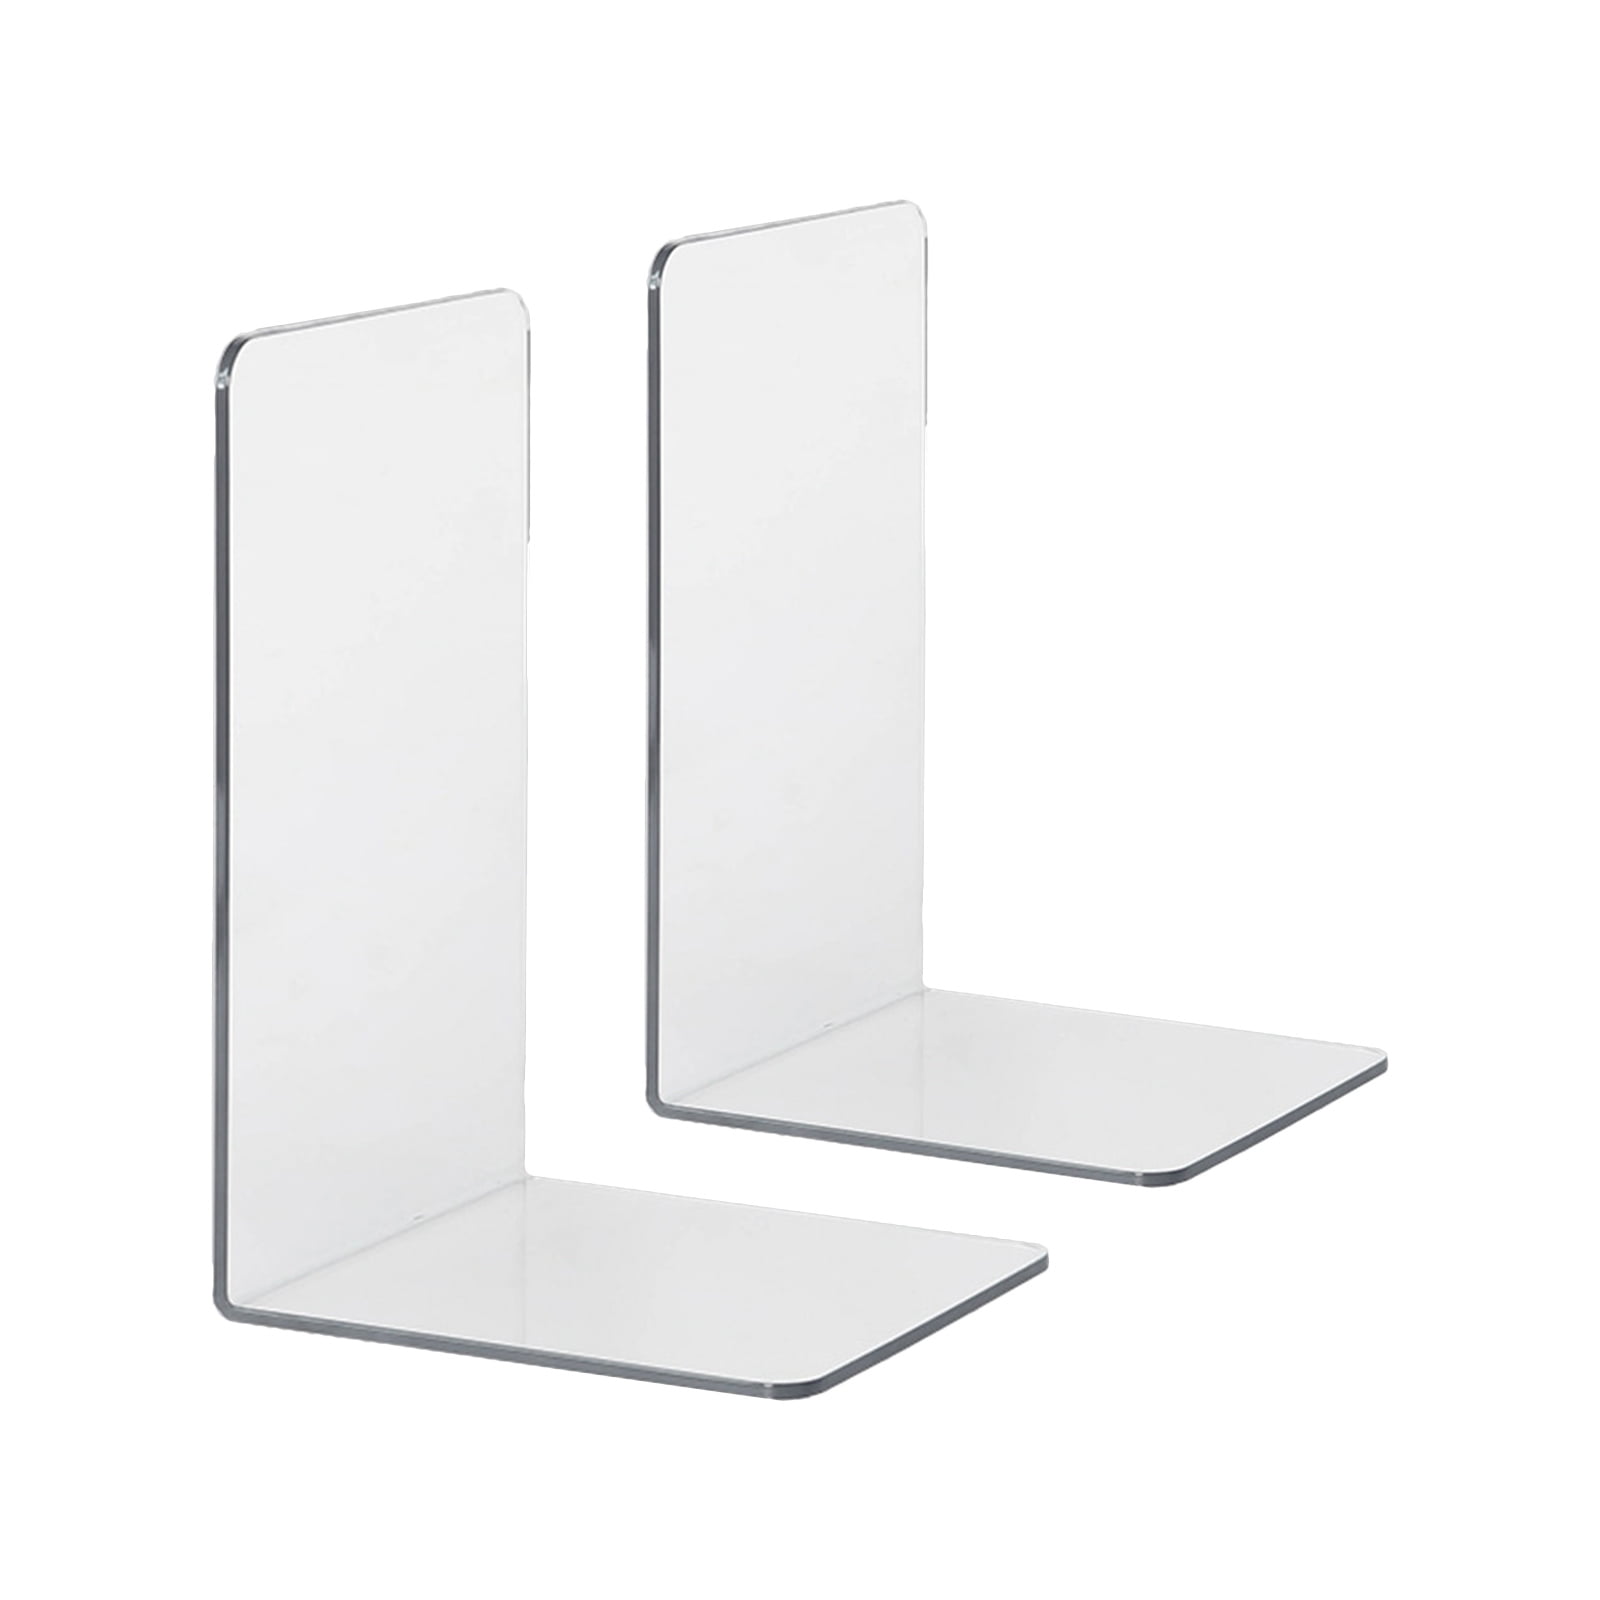 Perfect for use on desktops Ultimate Office Crystal Clear Acrylic Bookends or in cabinets. Set of 2 Shelving 